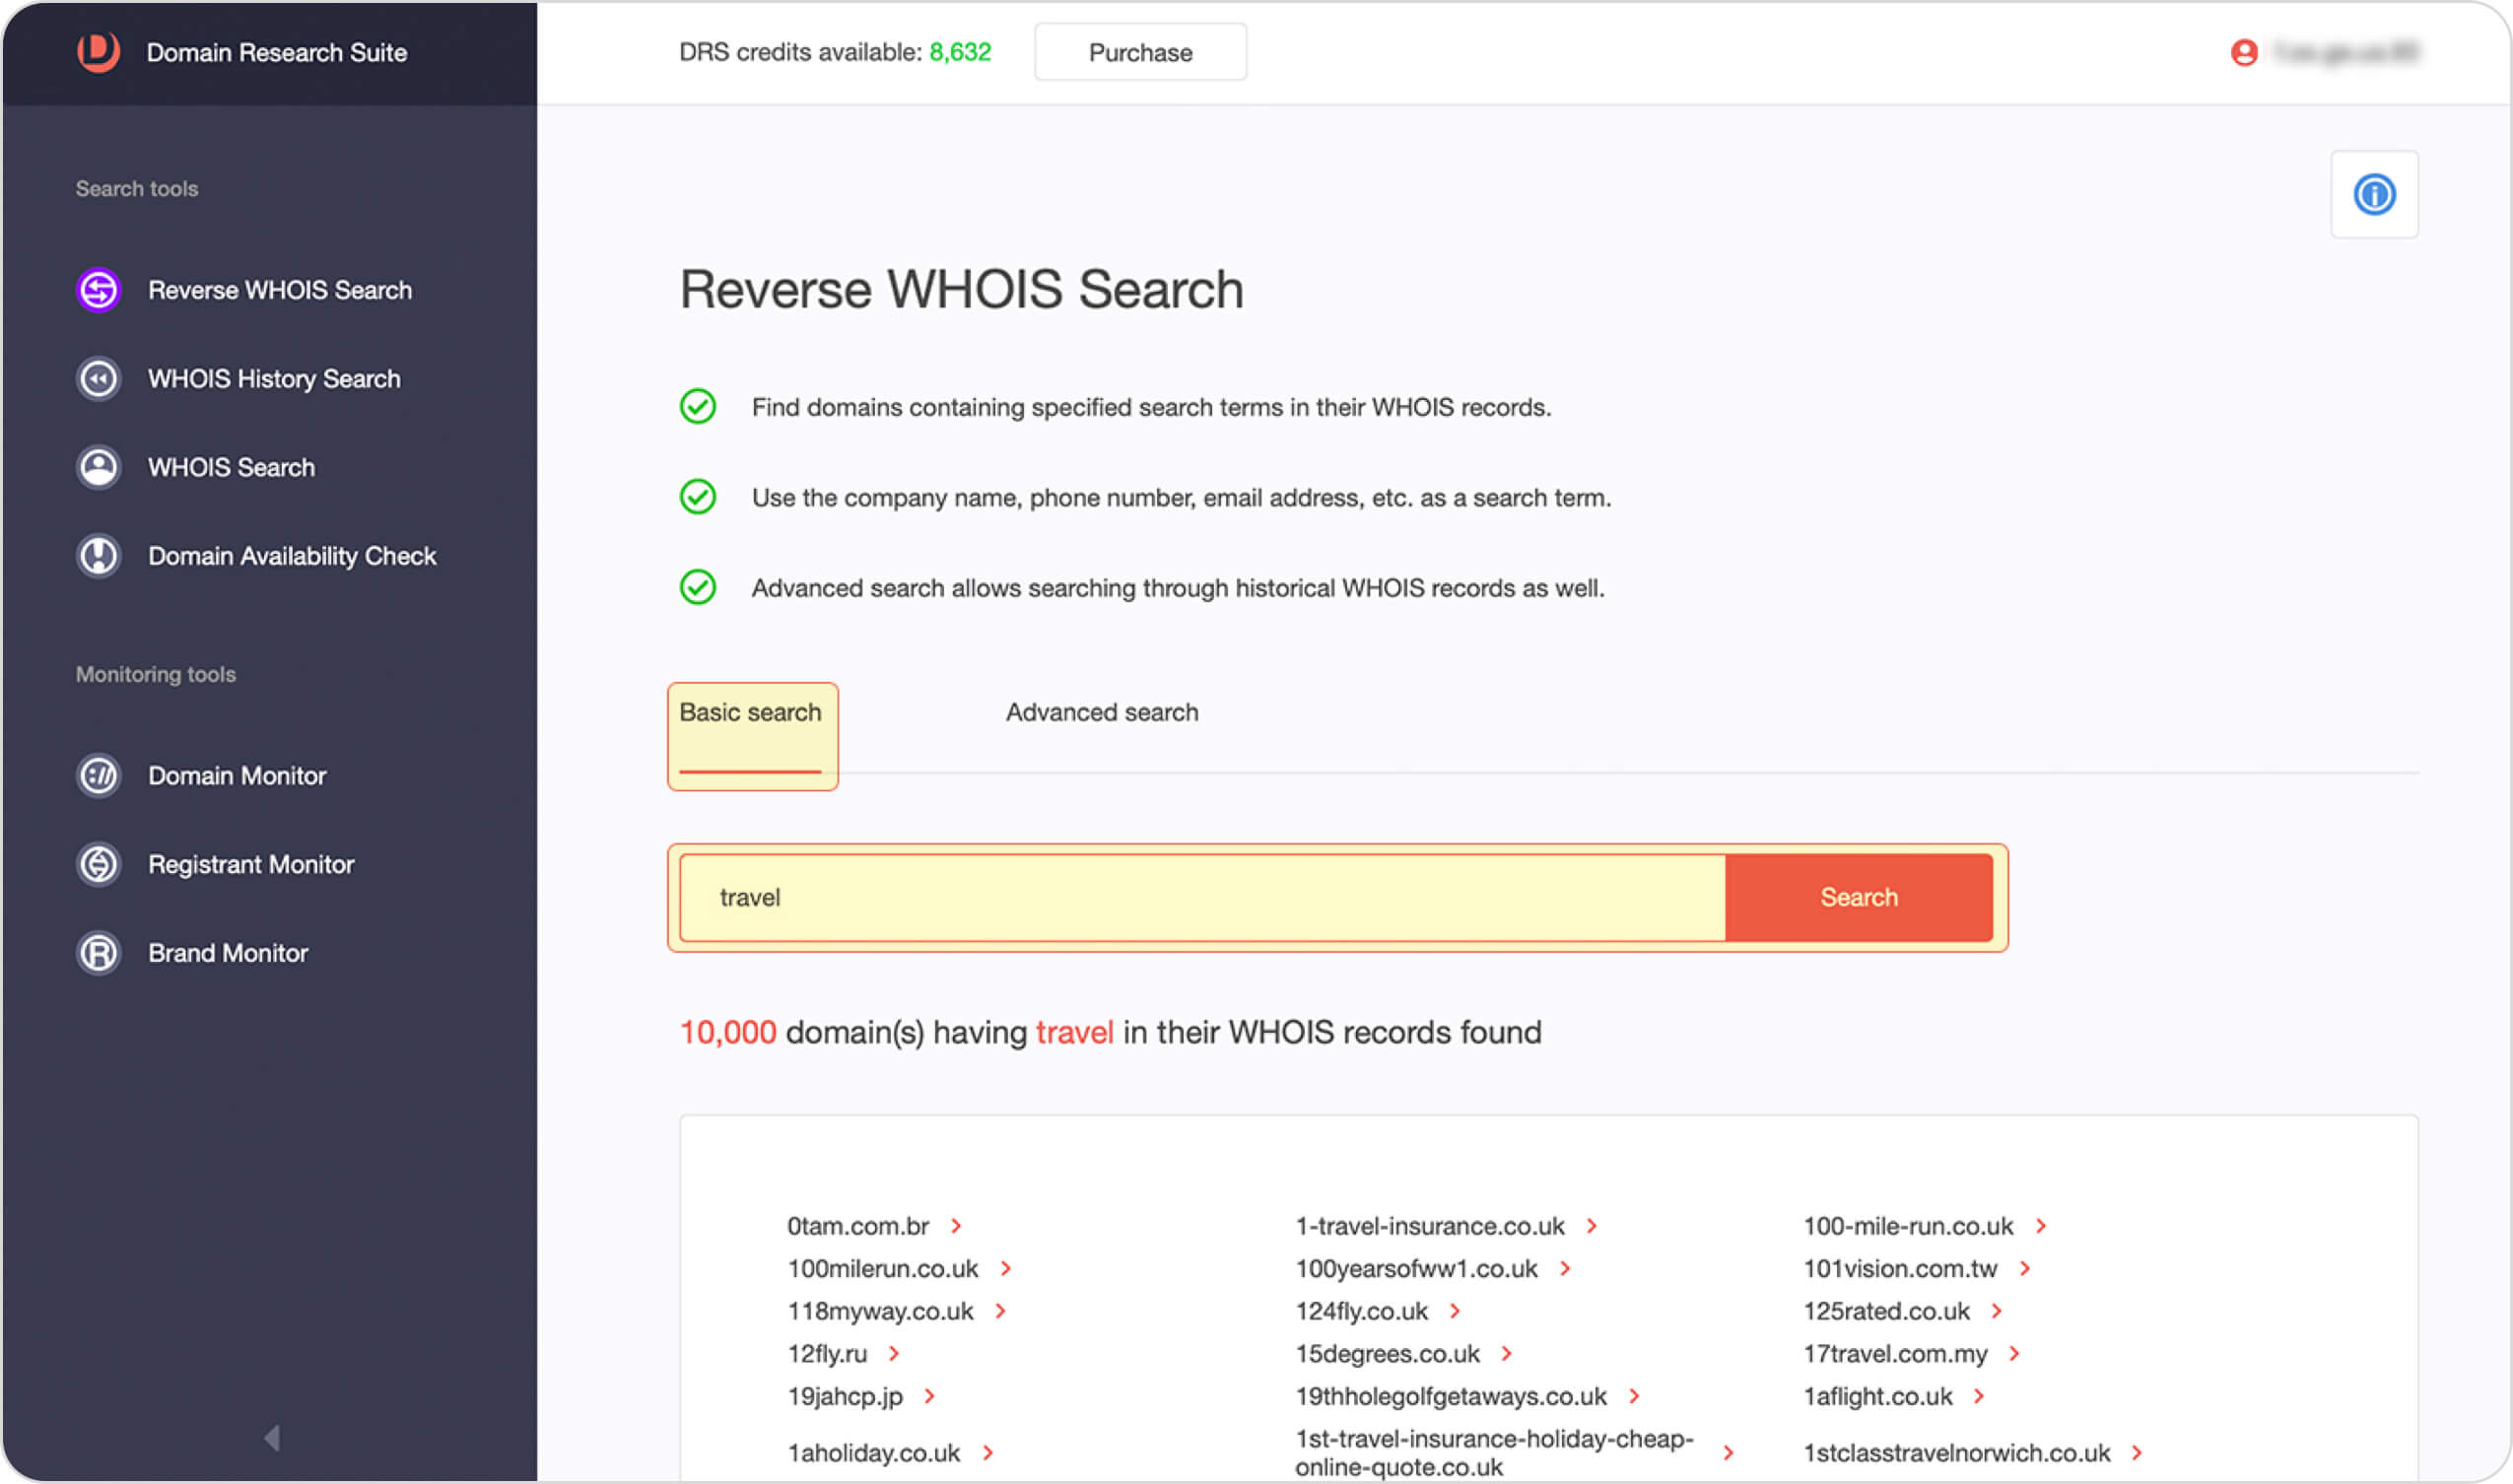 How to use the Whois Lookup Tool – Envato Author Help Center